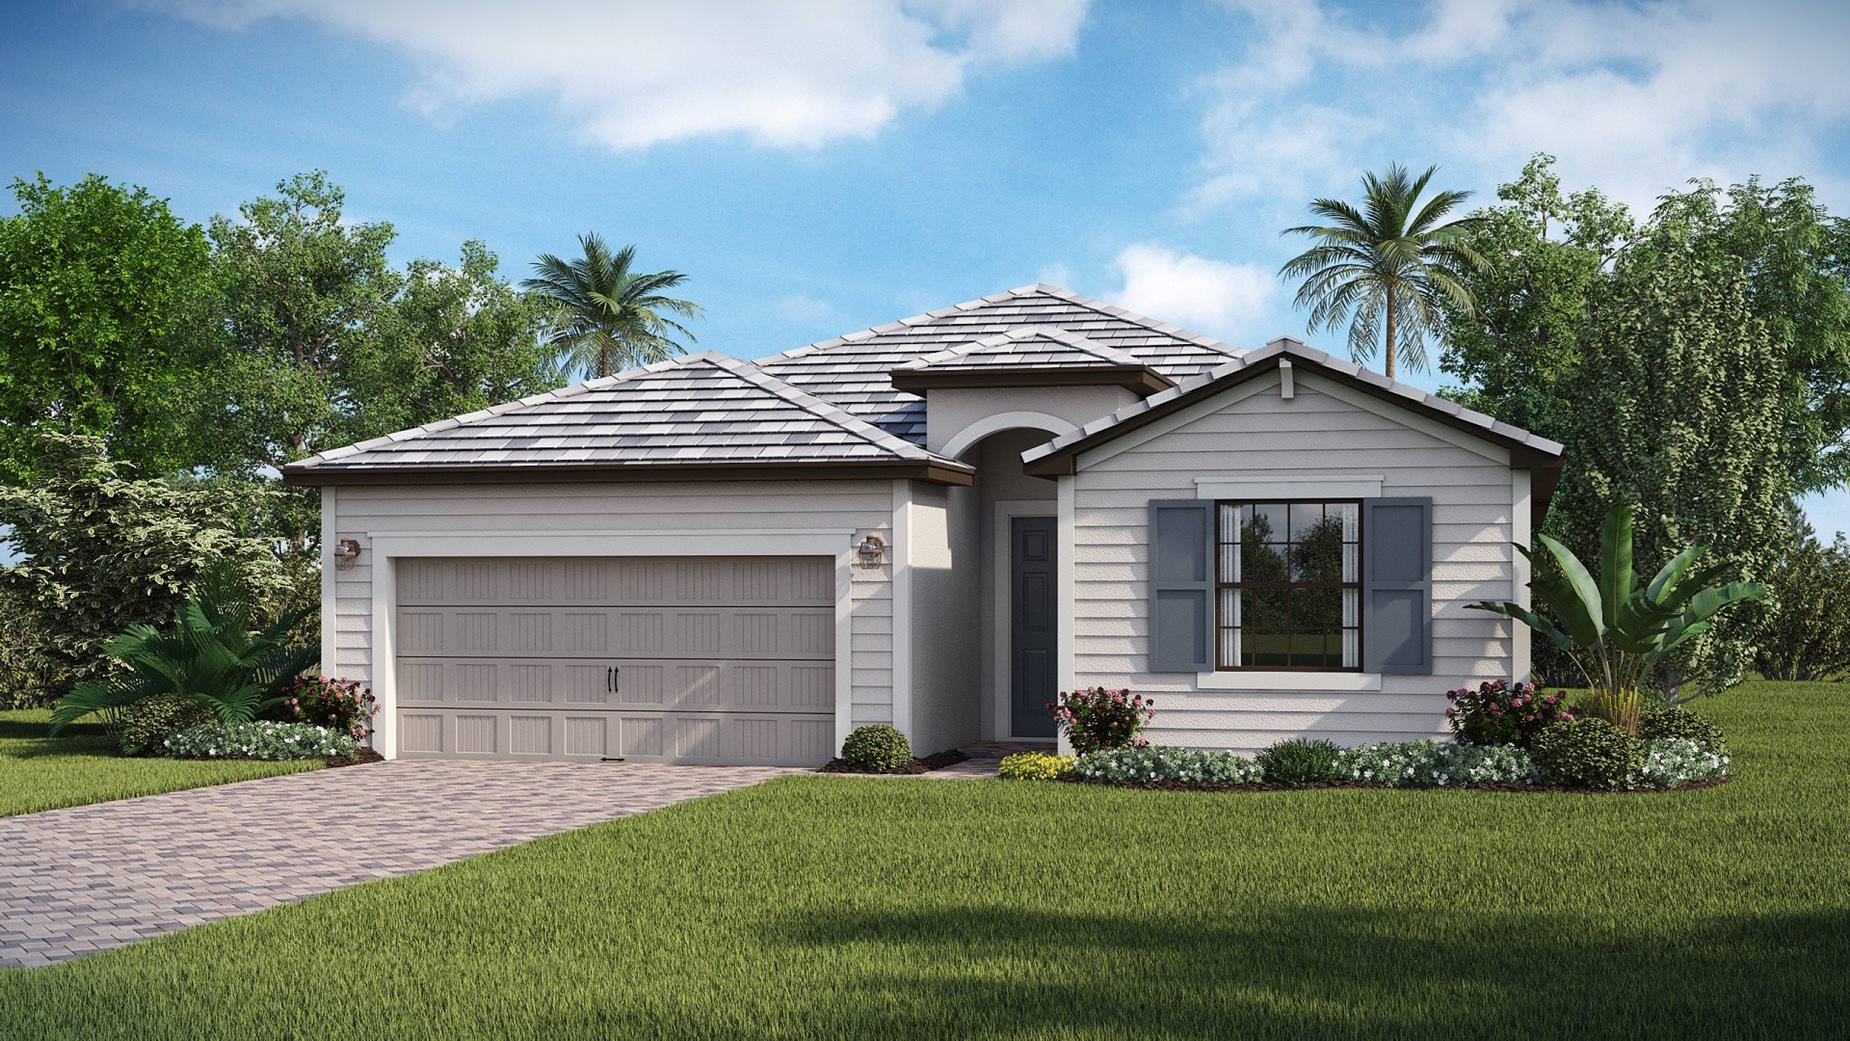 Trevi New Home Plan in Executive Homes at Timber Creek | Lennar